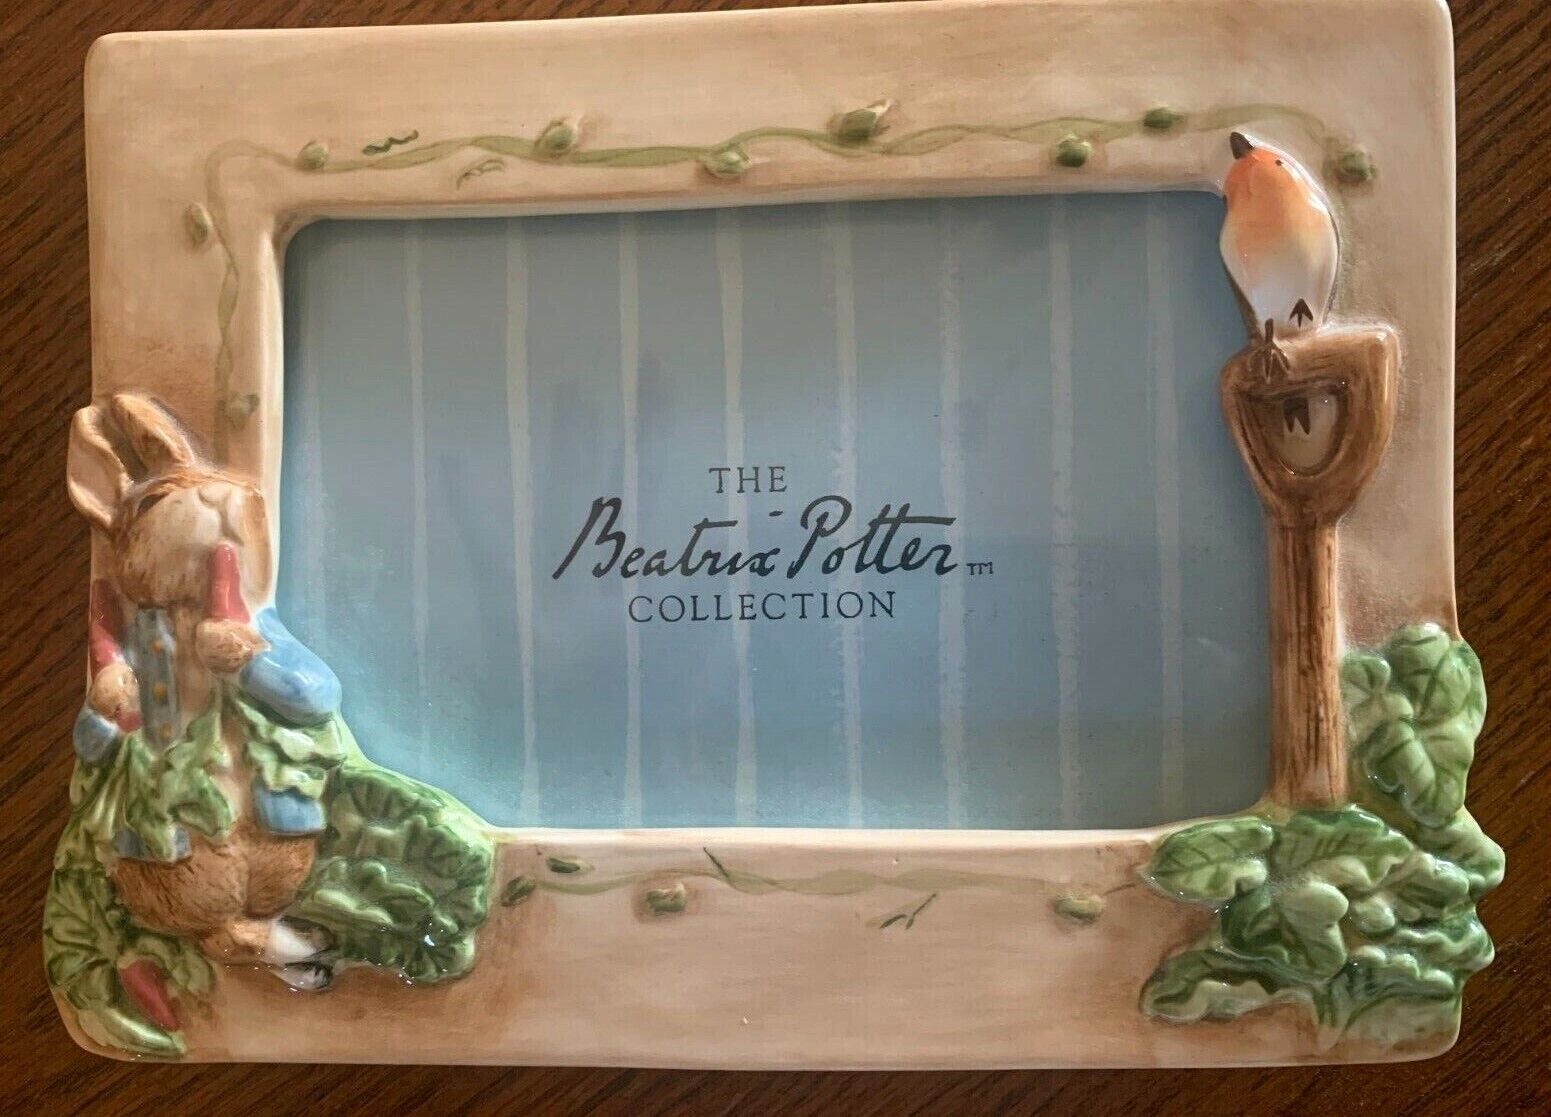 Peter Rabbit Frame by Beatrix Potter Frederick Warne & Co. by Charpente